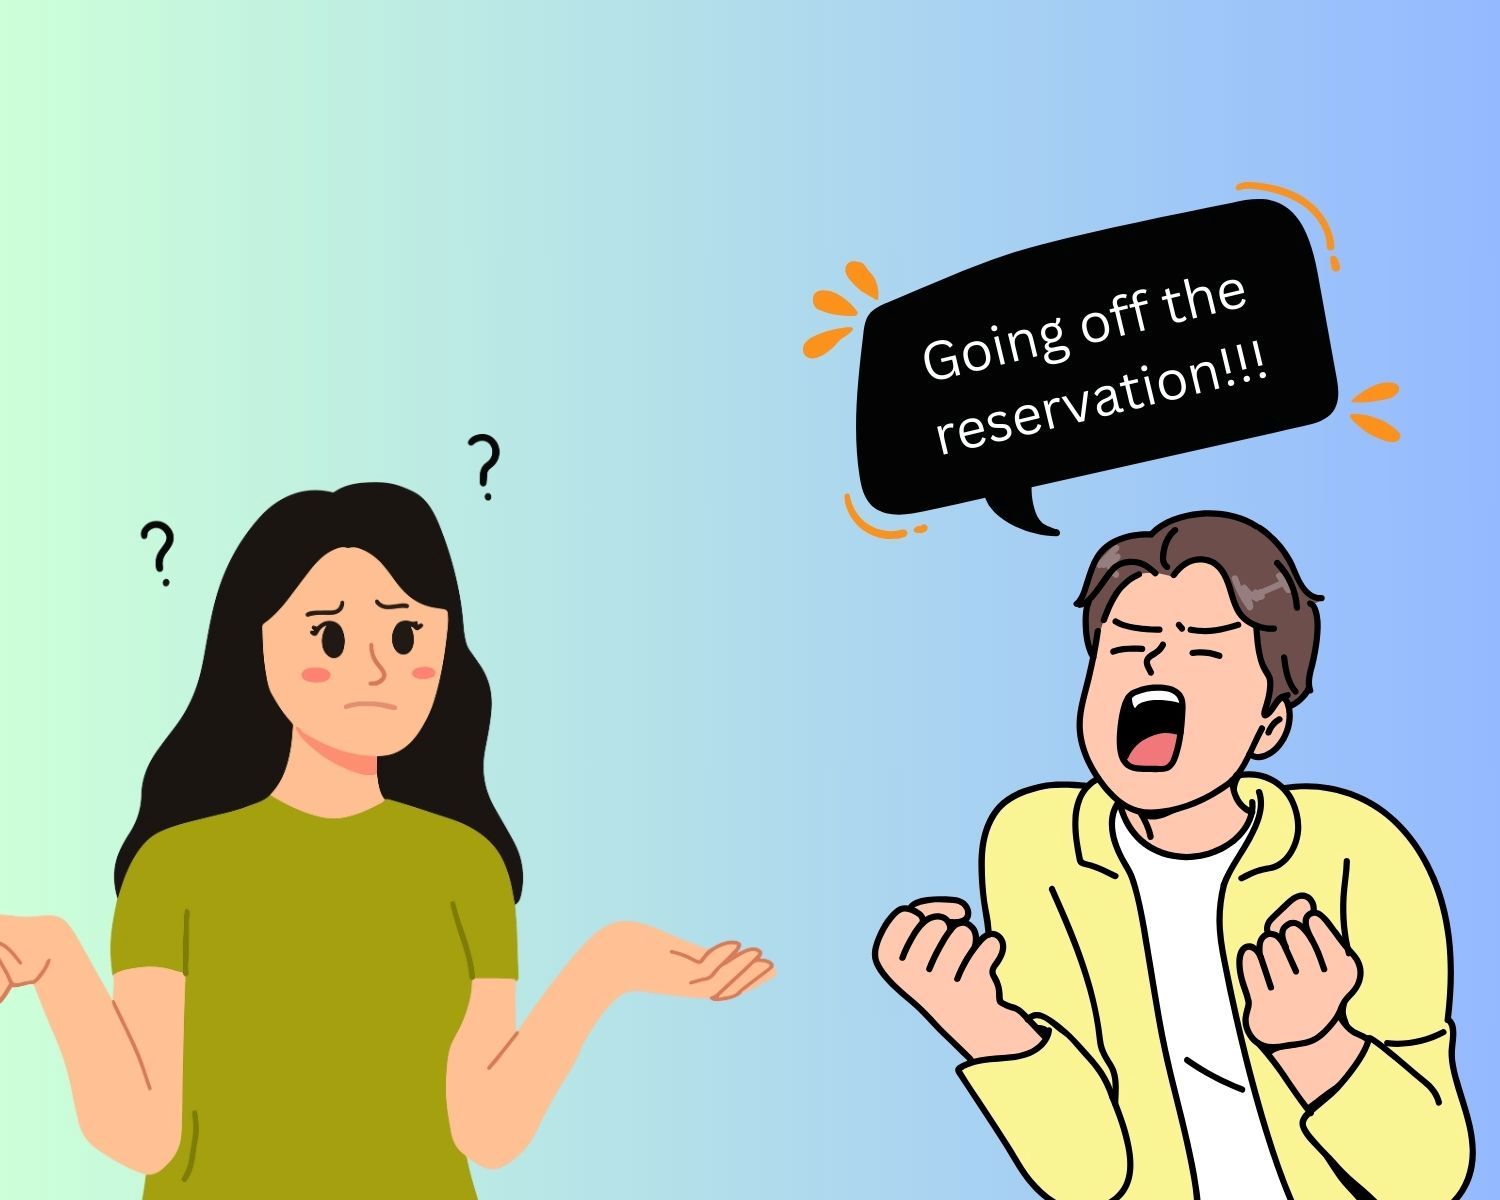 Is ‘Going Off The Reservation’ Offensive?